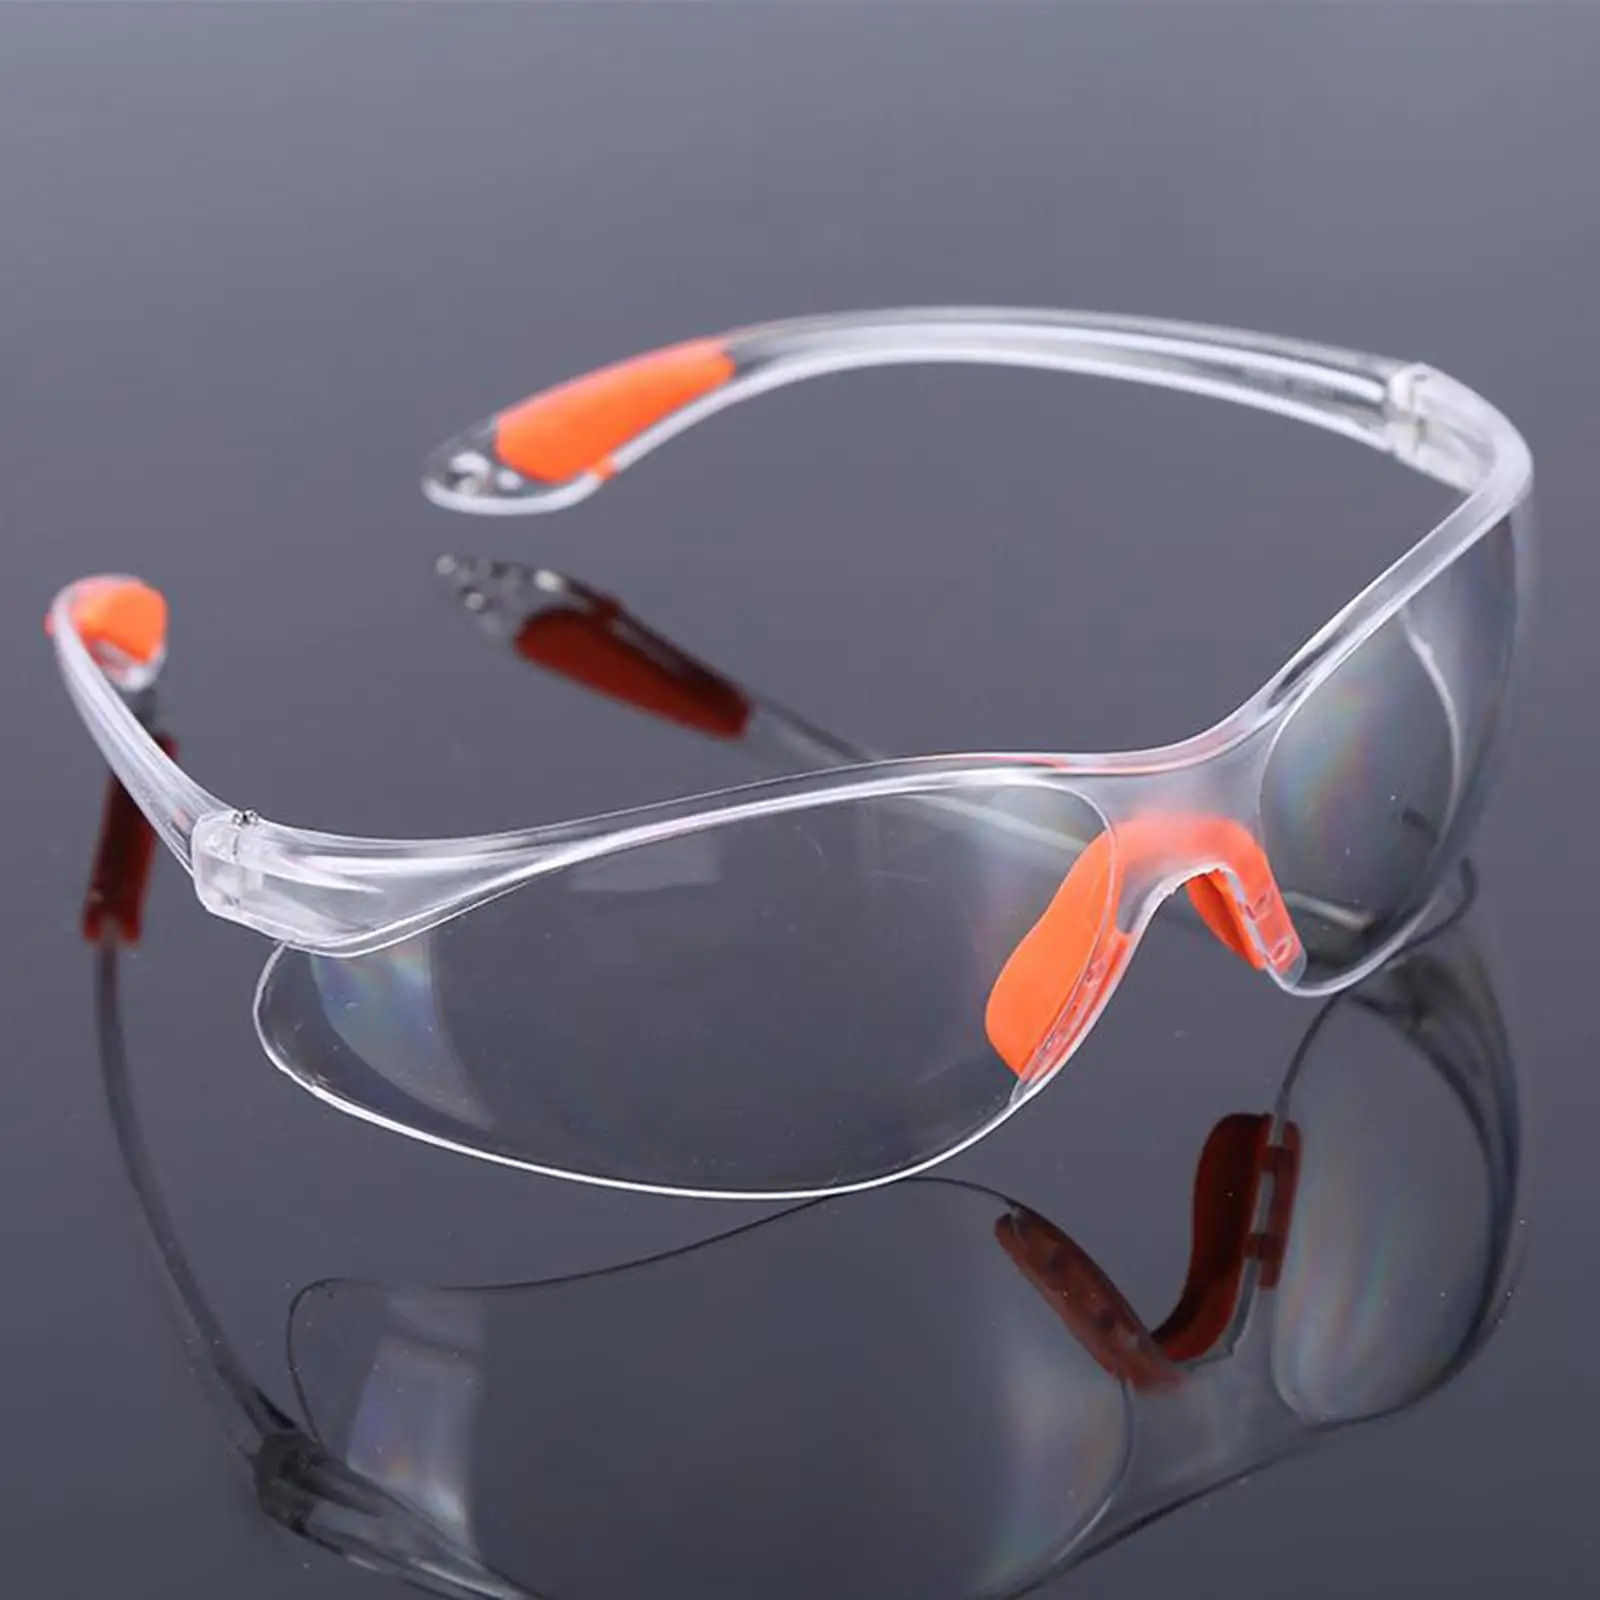 Dustproof Anti- Safety Glasses  Glasses Perfect Eye Protection